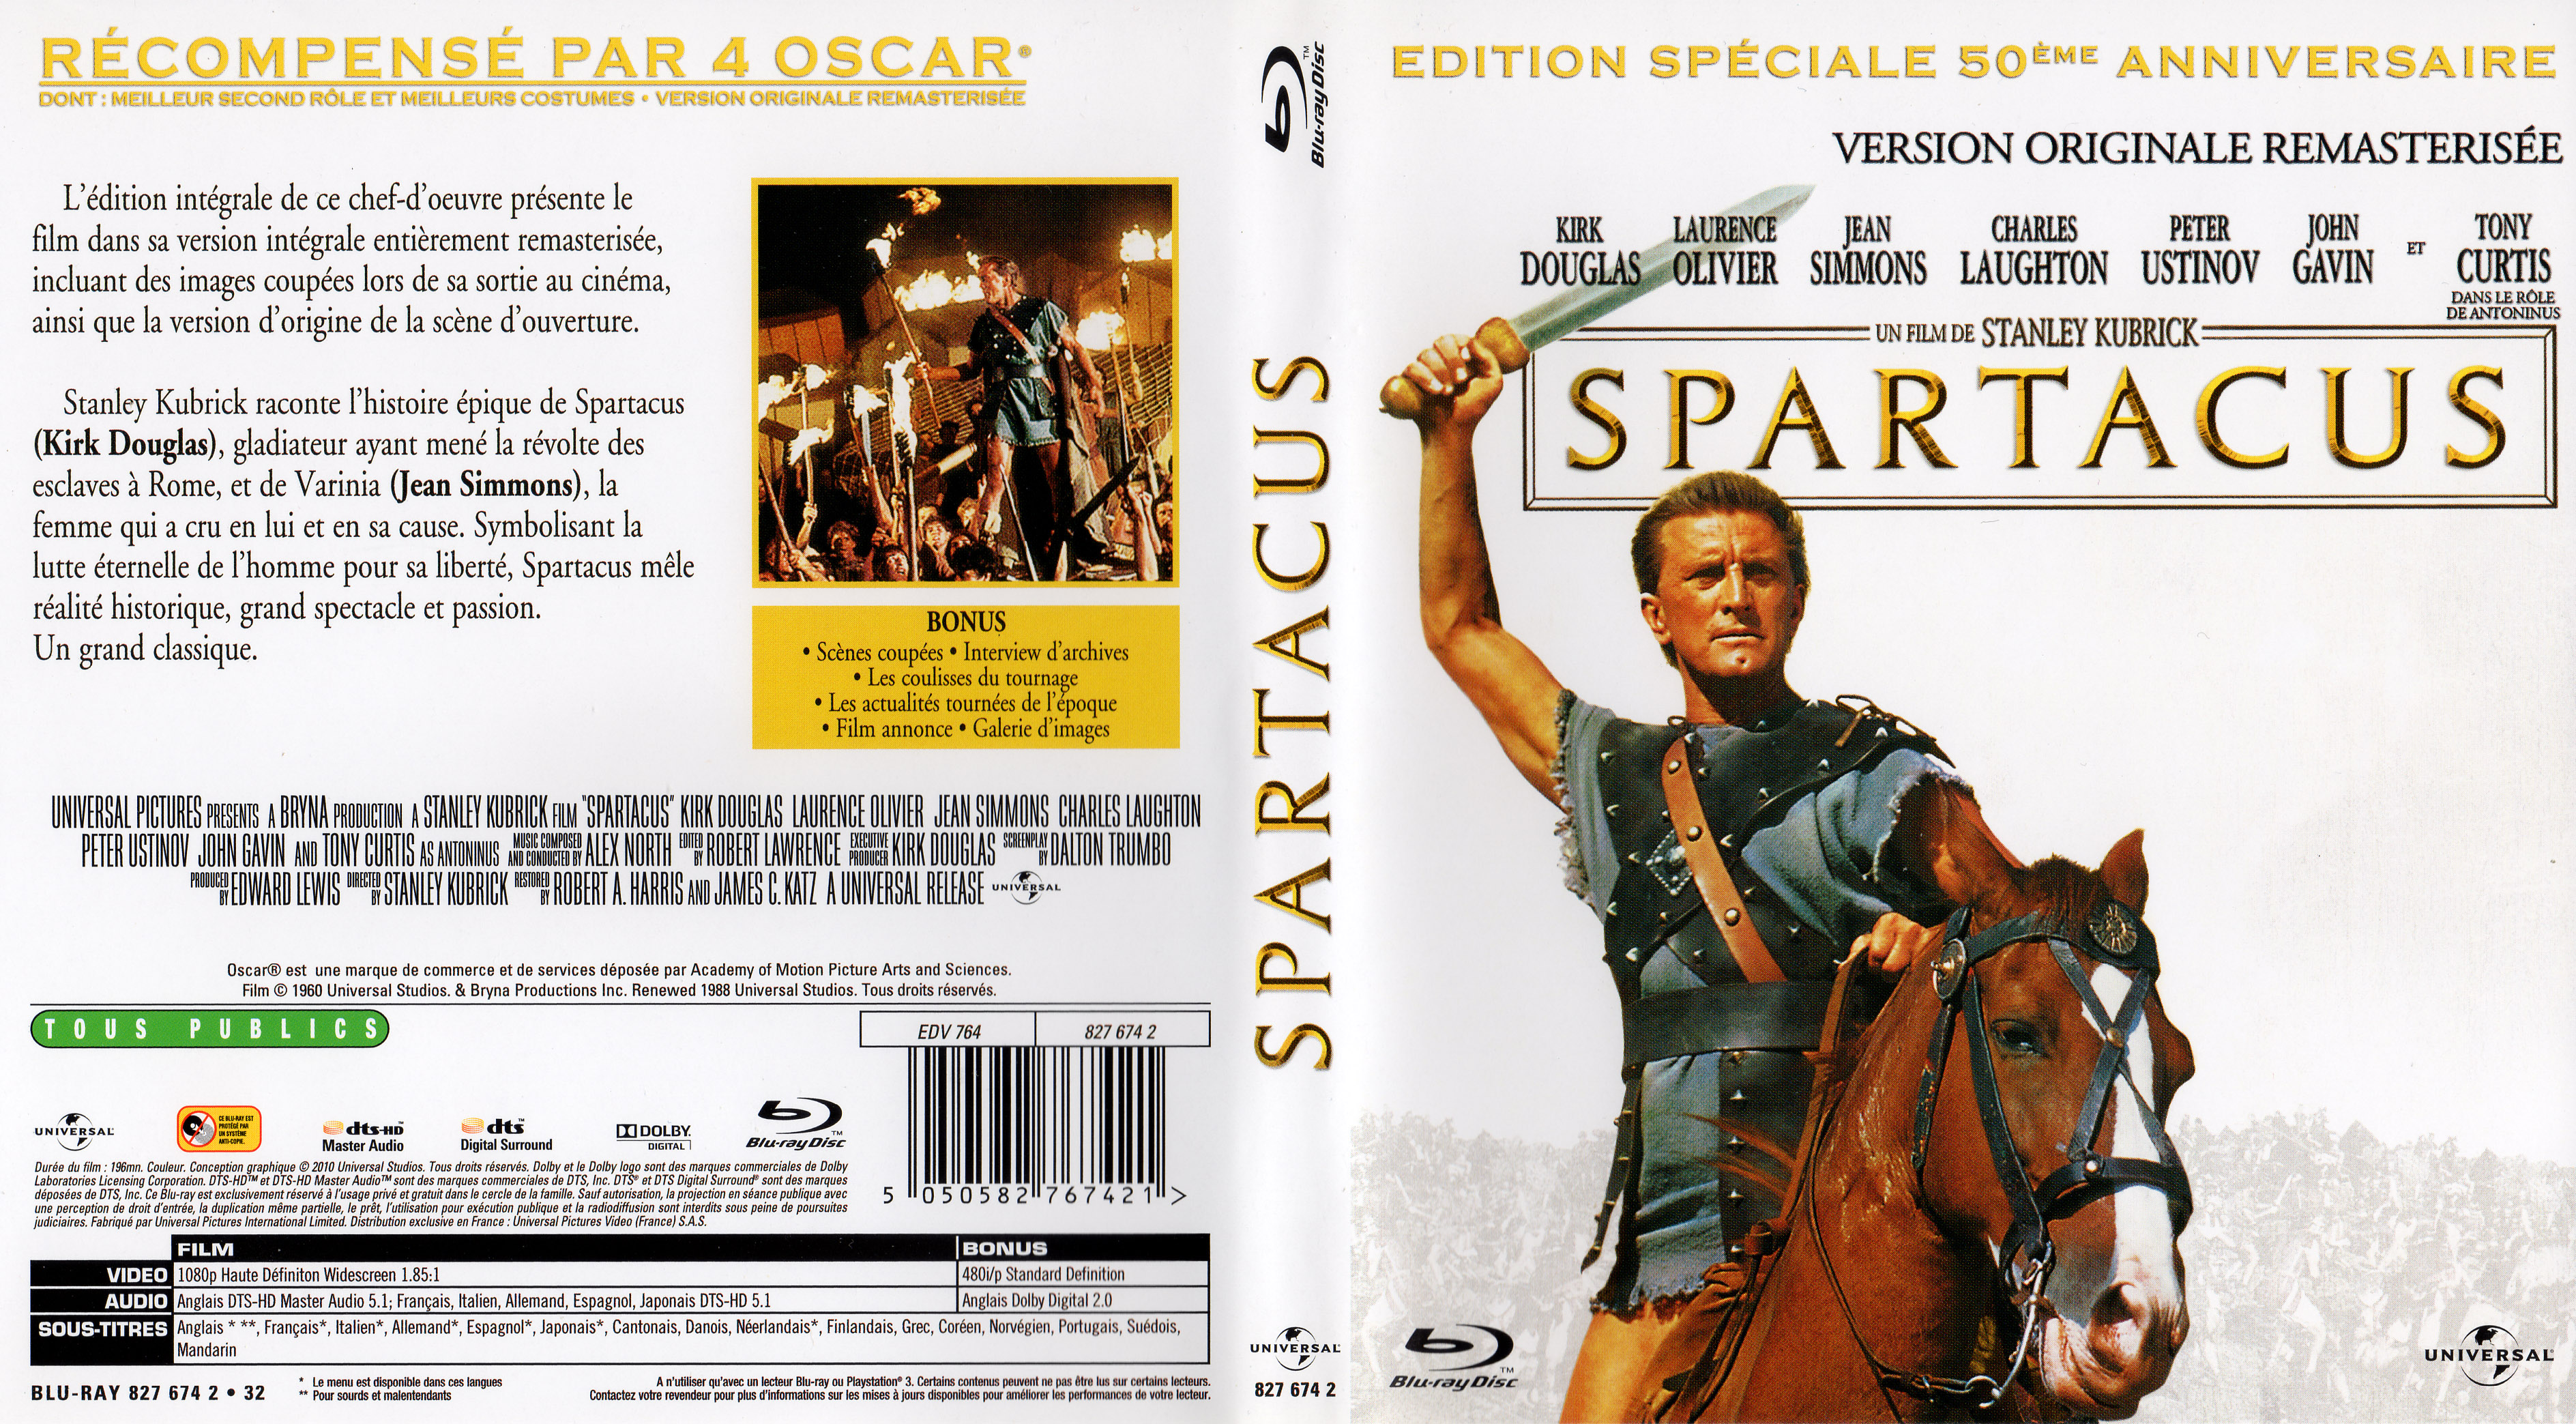 Jaquette DVD Spartacus (BLU-RAY)